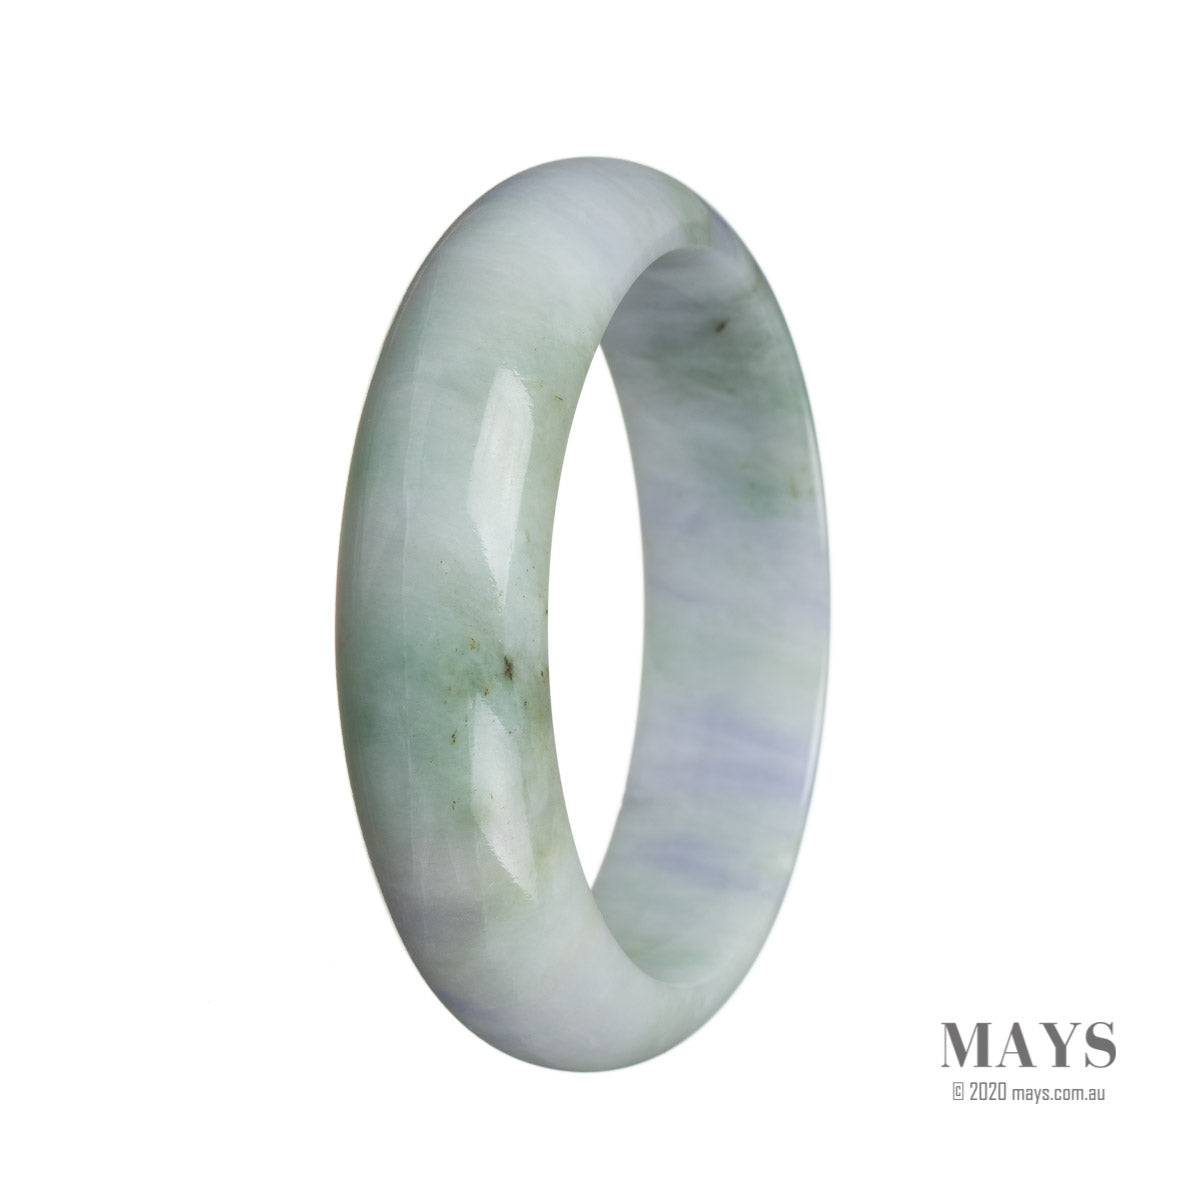 Image of a light green bracelet made from genuine grade A lavender Burma Jade. The bracelet is in the shape of a half moon and measures 59mm in size. Perfect for adding a touch of elegance to any outfit.